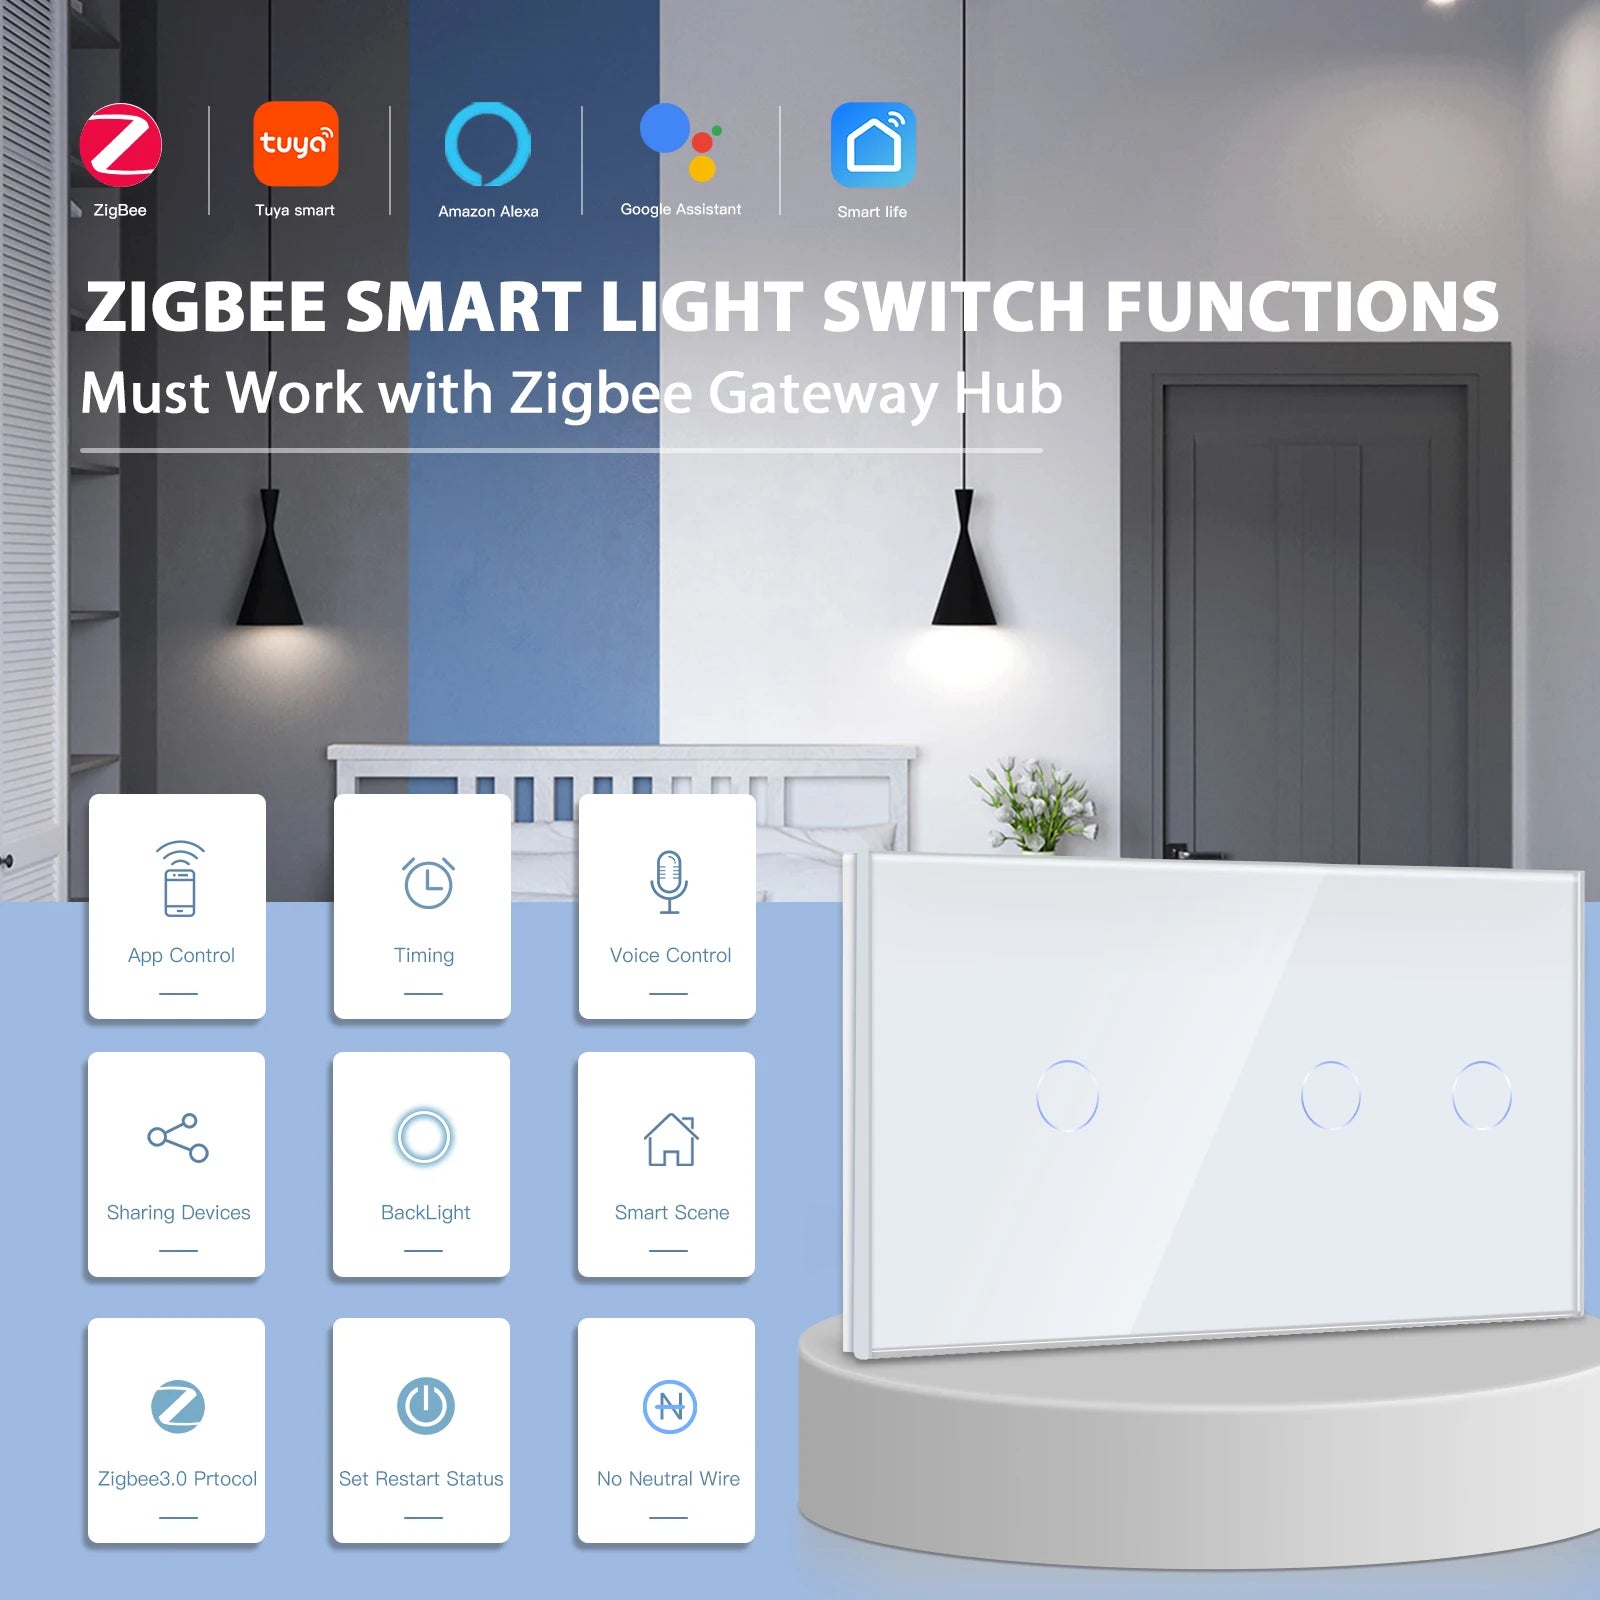 Bseed 10A 3 Gang Touch Wifi Smart Voice Control Wall Switch